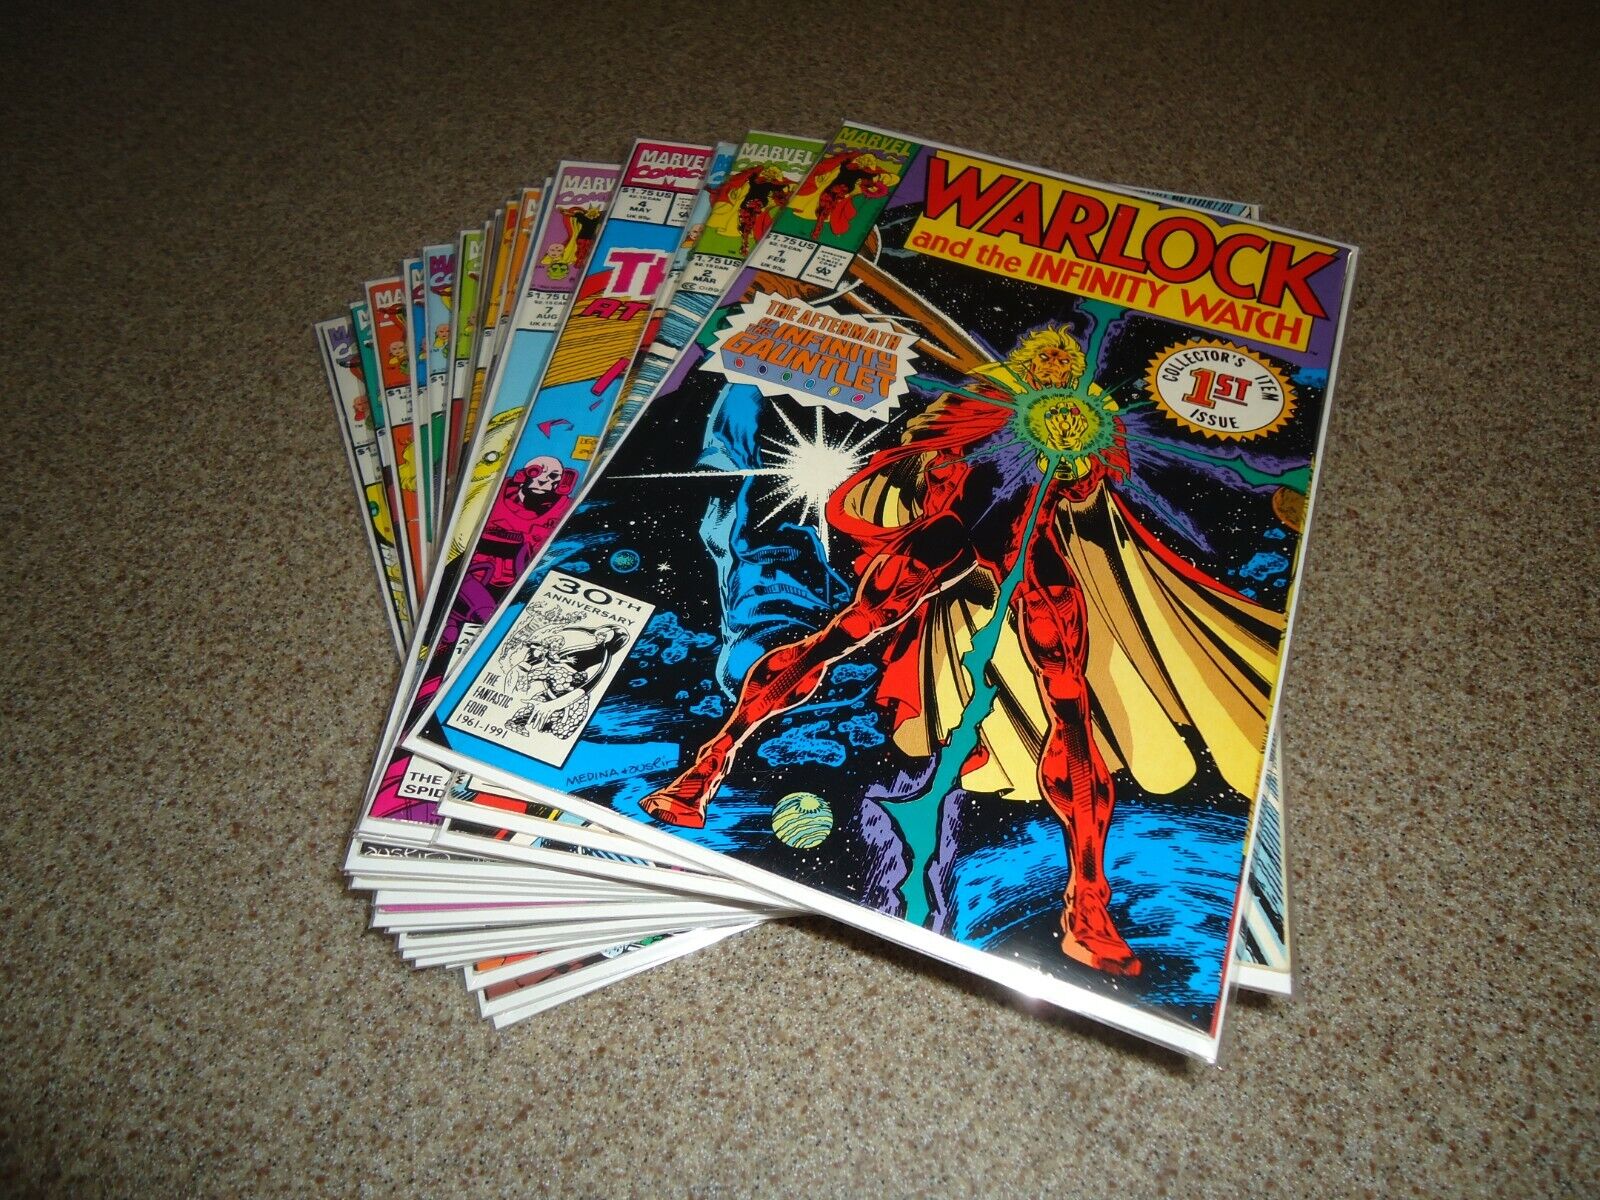 WARLOCK AND THE INFINITY WATCH 1-20 COMPLETE HIGH GRADE RUN